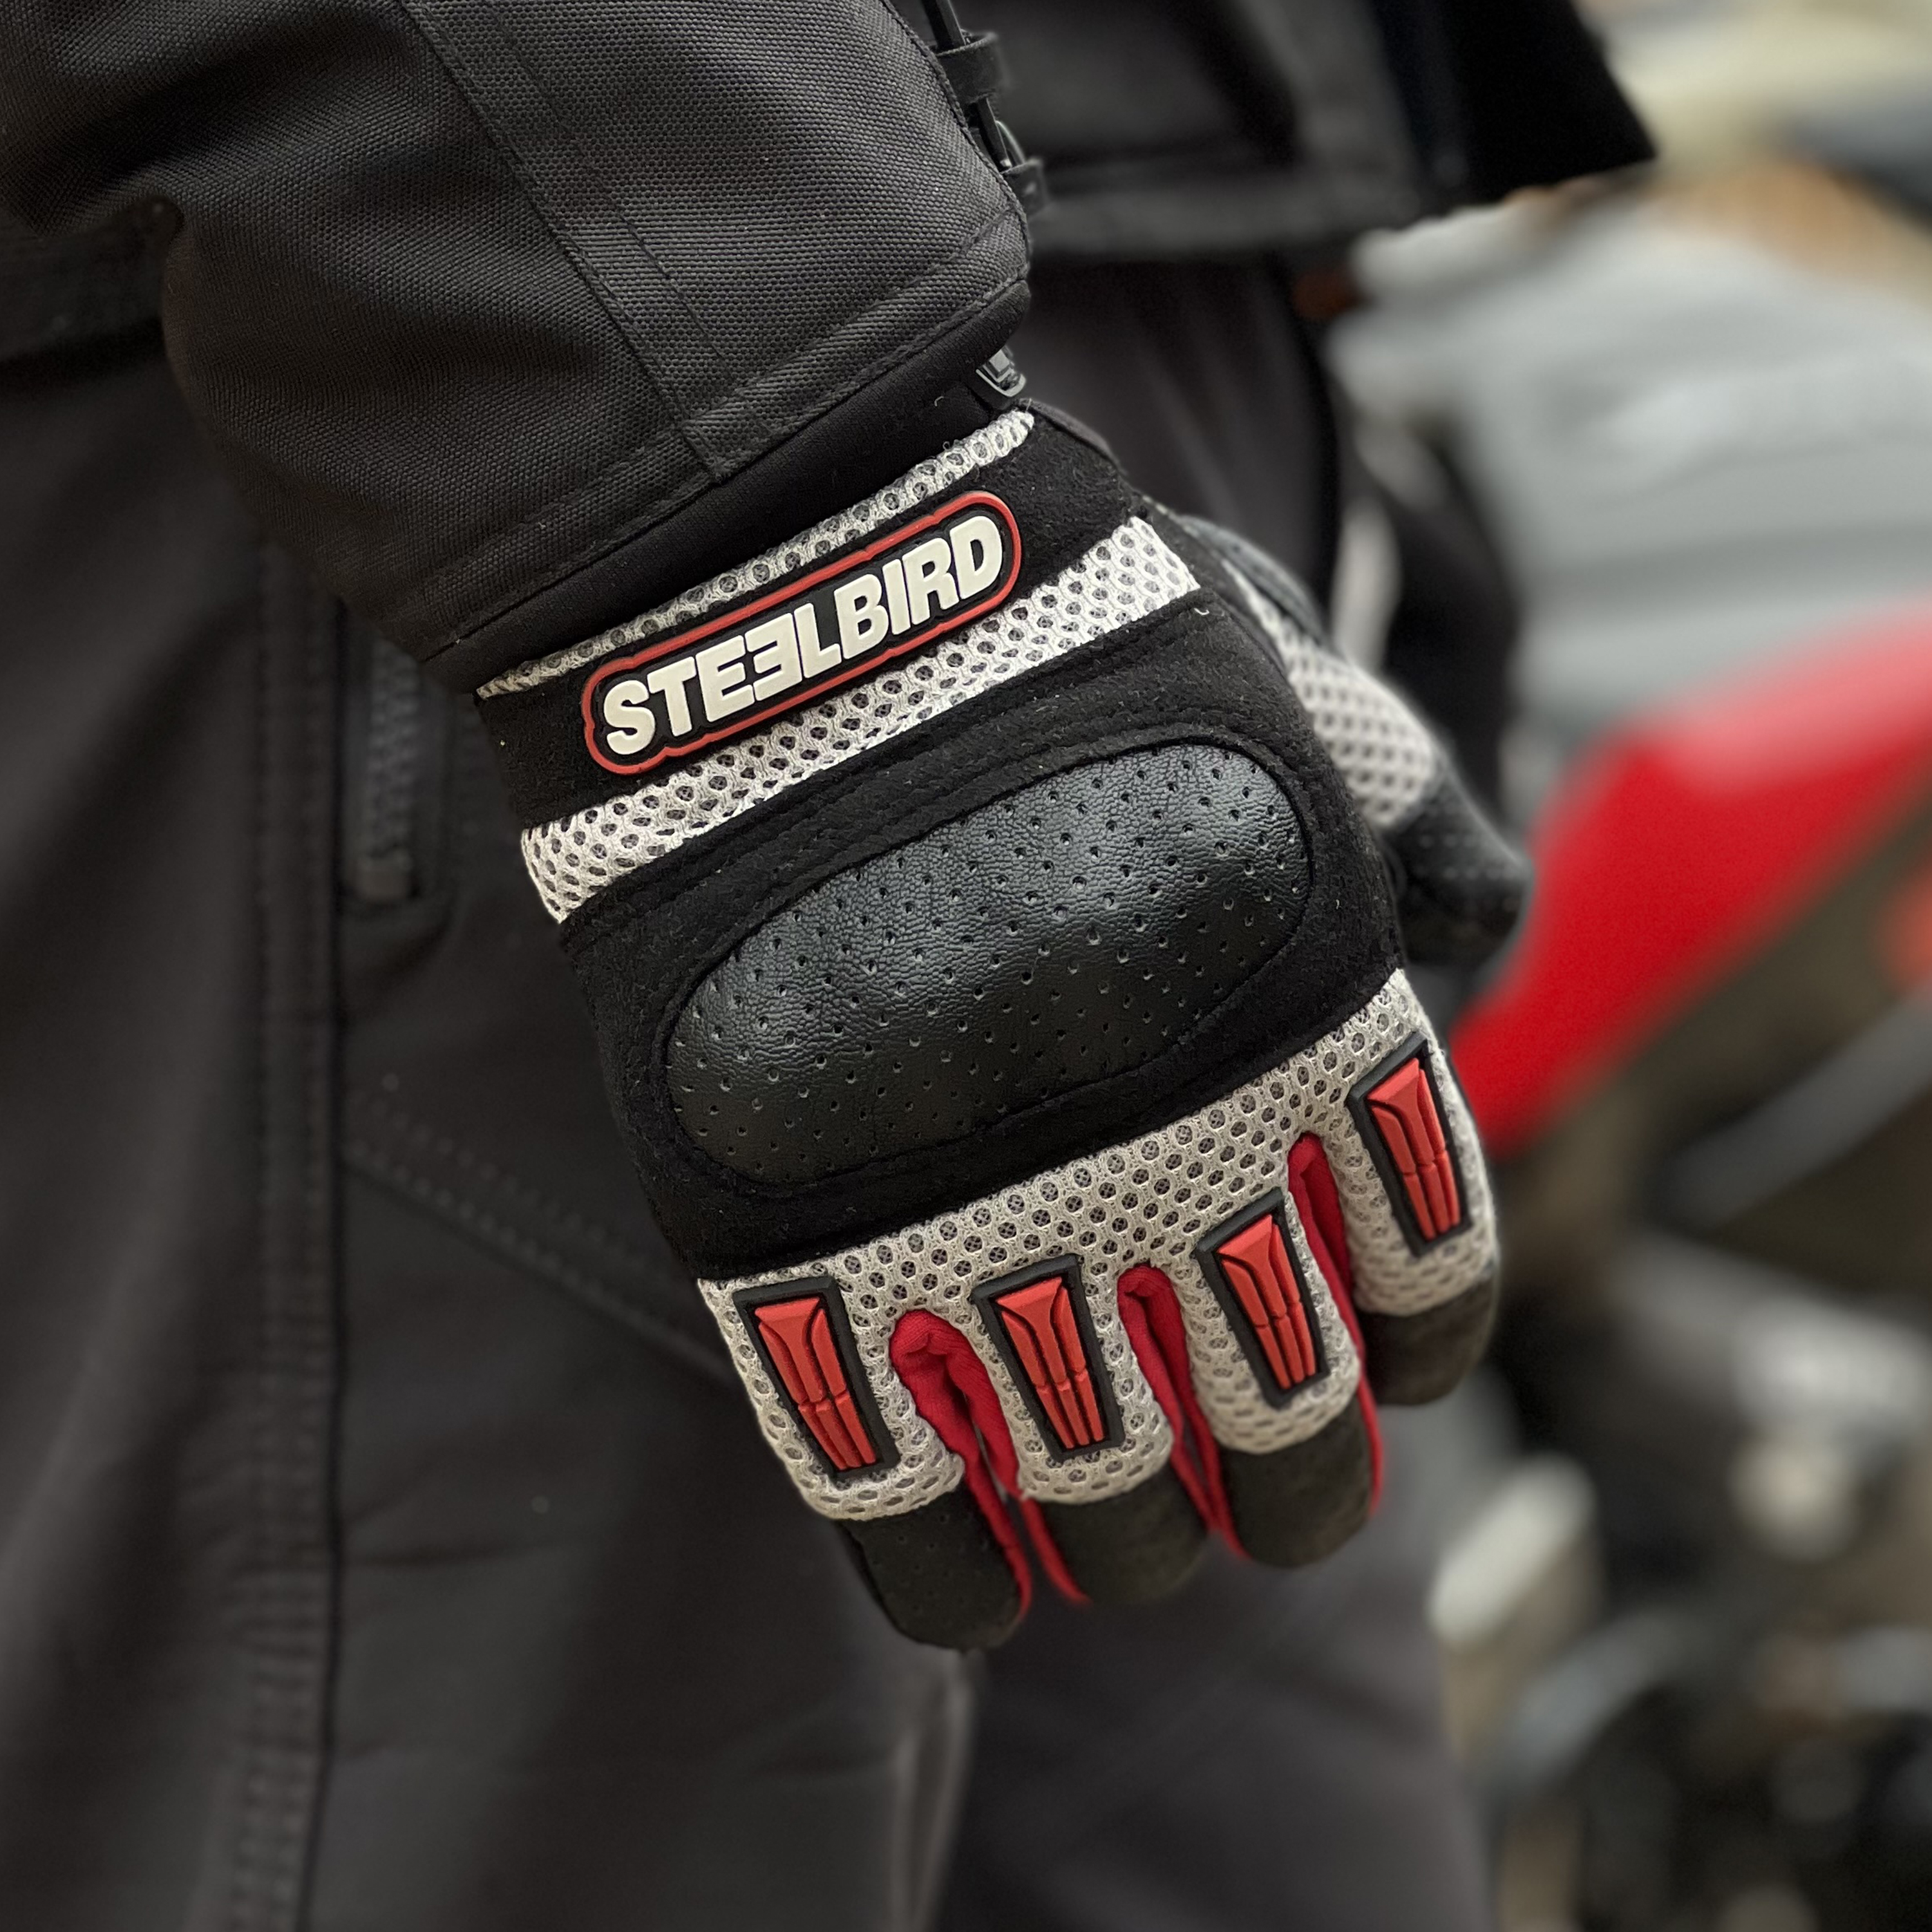 Steelbird Adventure A-1 Full Finger Riding Gloves With Touch Screen Sensitivity At Thumb & Index Finger, Protective Off-Road Motorbike Racing (Red)